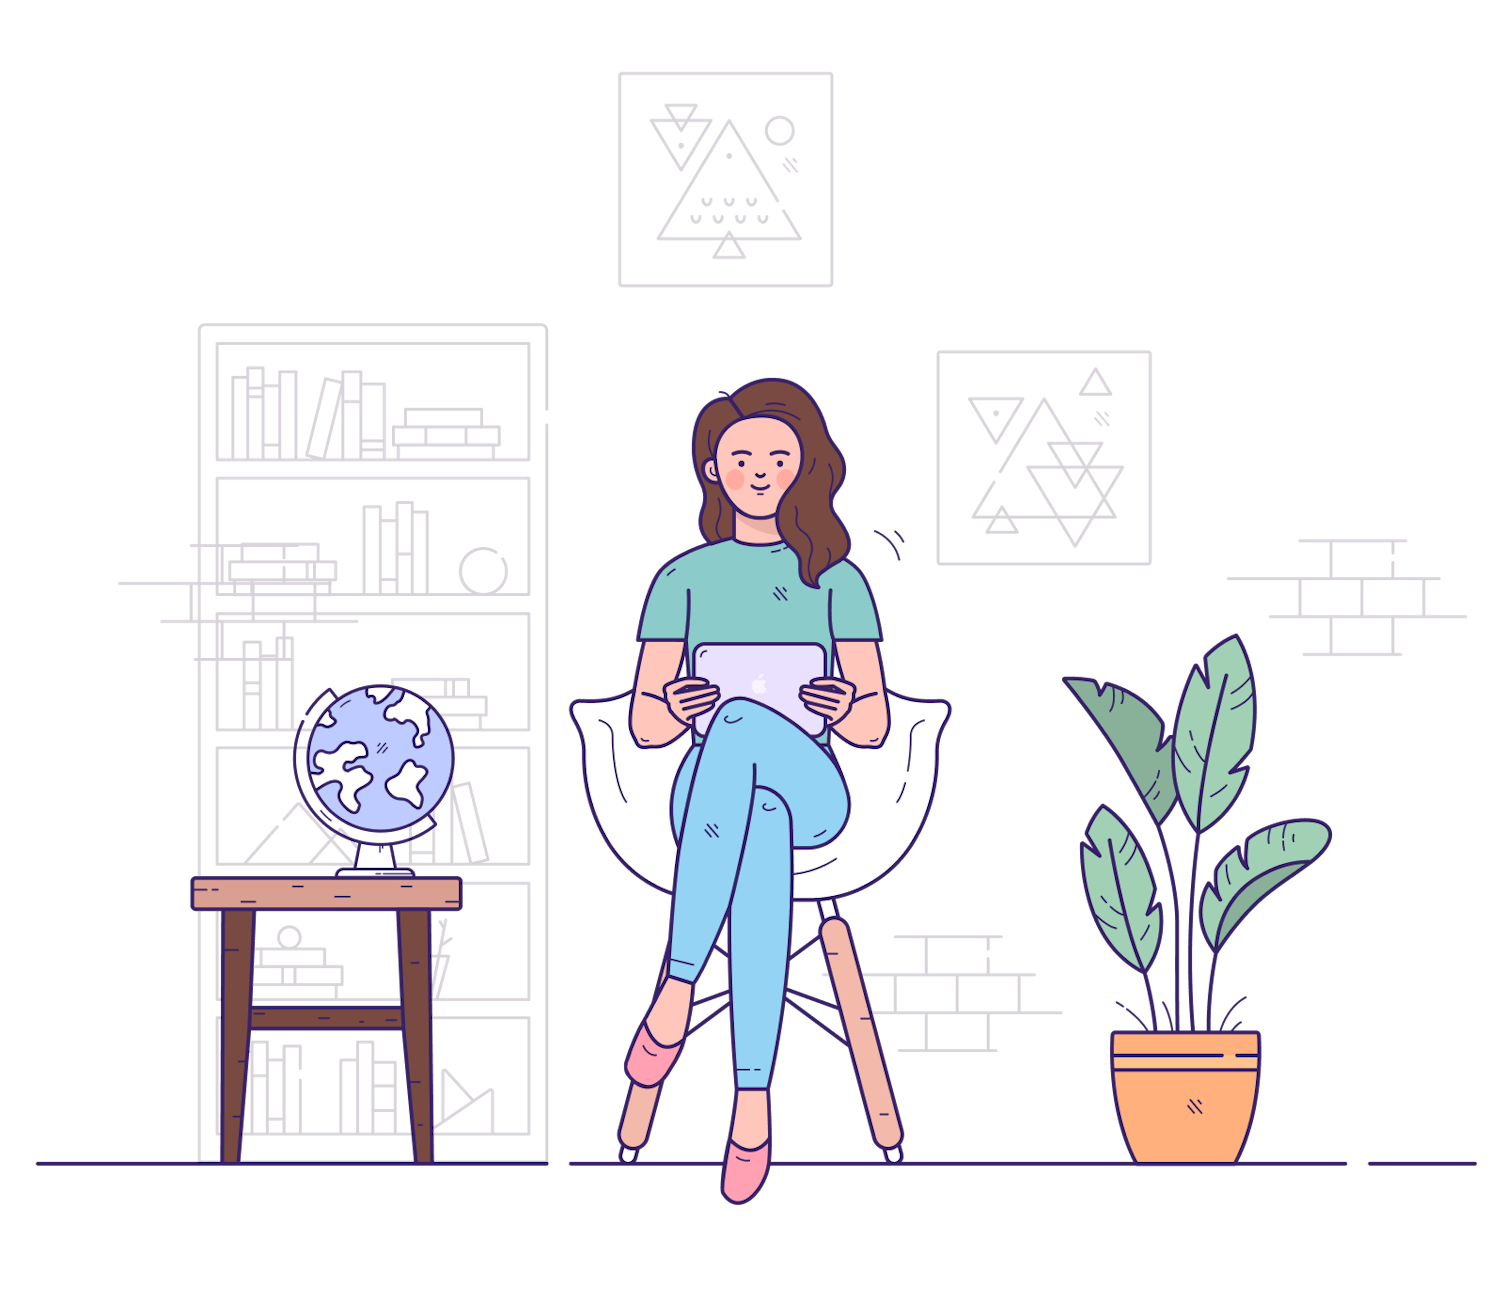 Illustration of a woman sitting in a modern chair, holding a tablet, with a bookshelf, globe, and plant nearby, suggesting a cozy reading or study area.